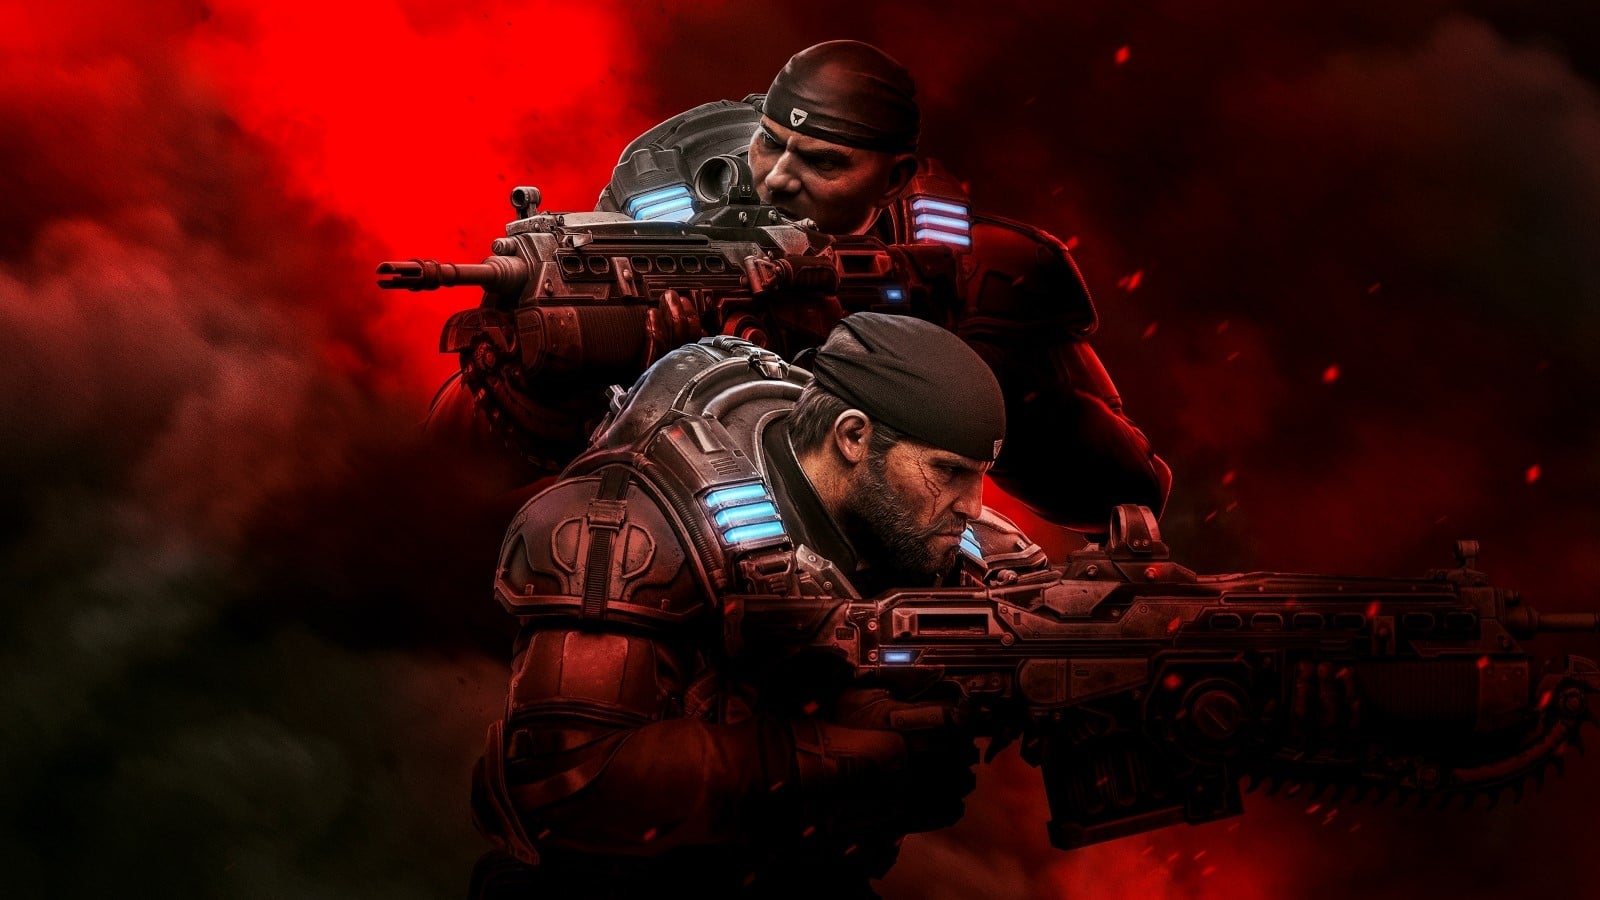 Gears of War 3 (Game) - Giant Bomb